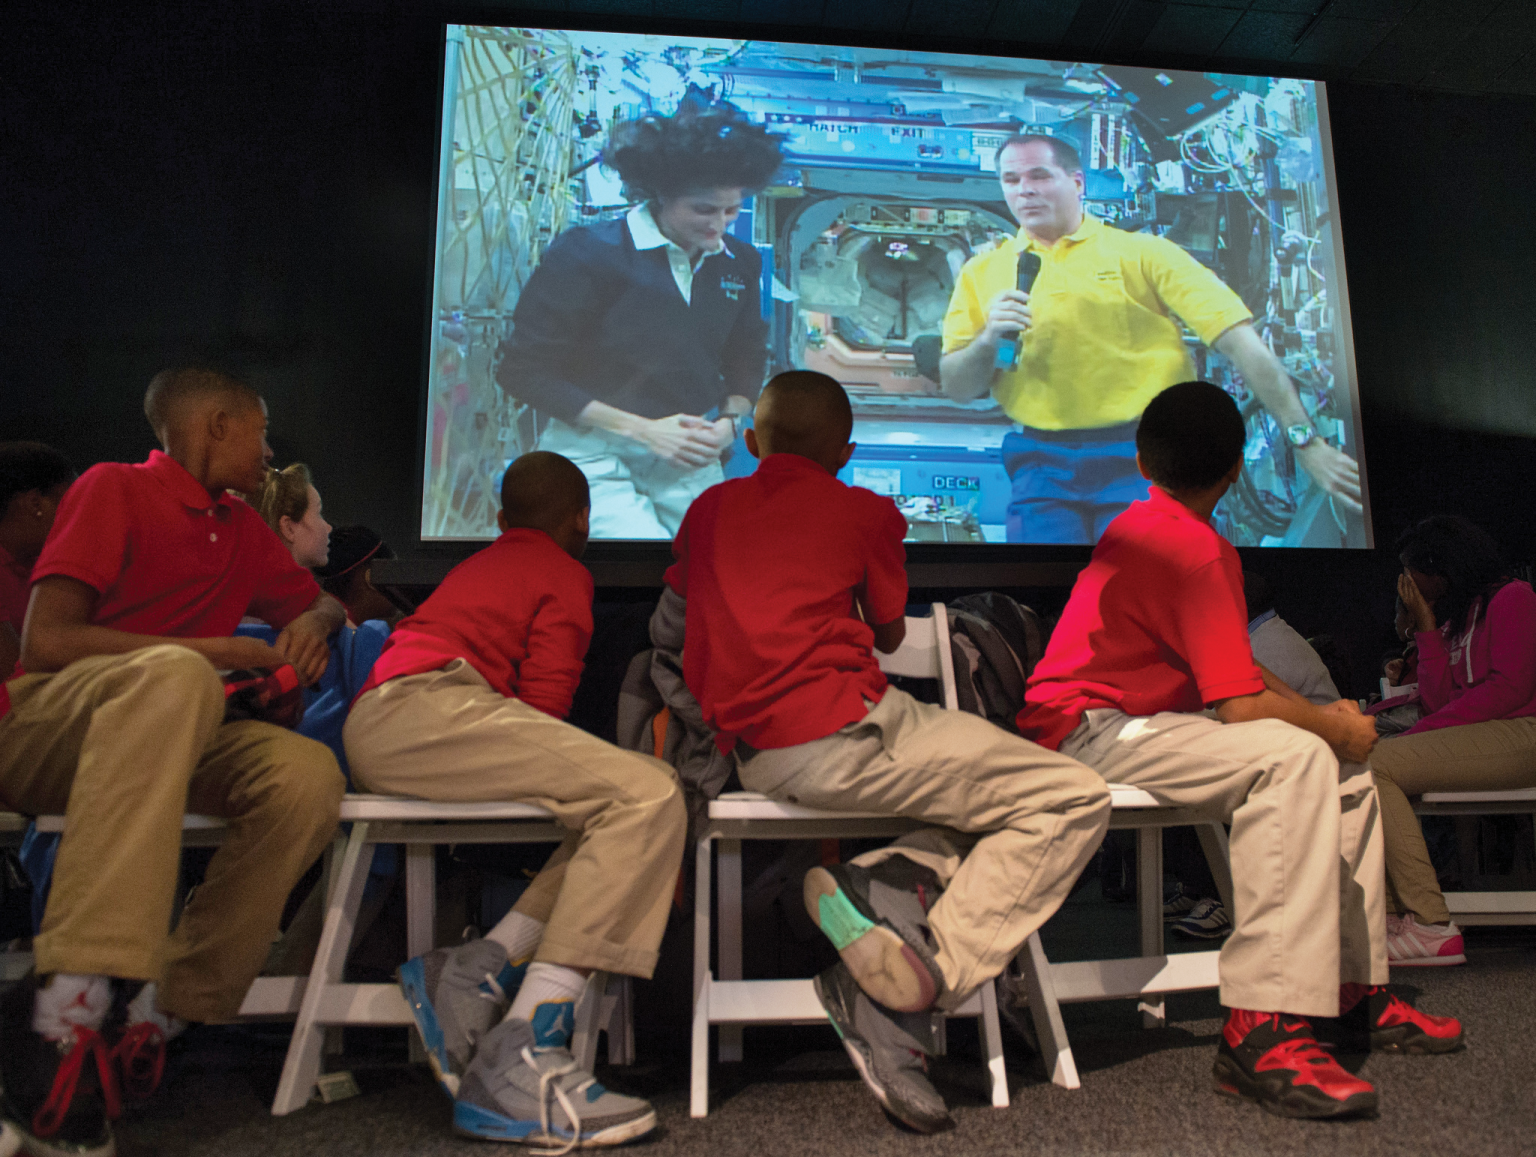 image of students speaking with astronauts aboard the space station